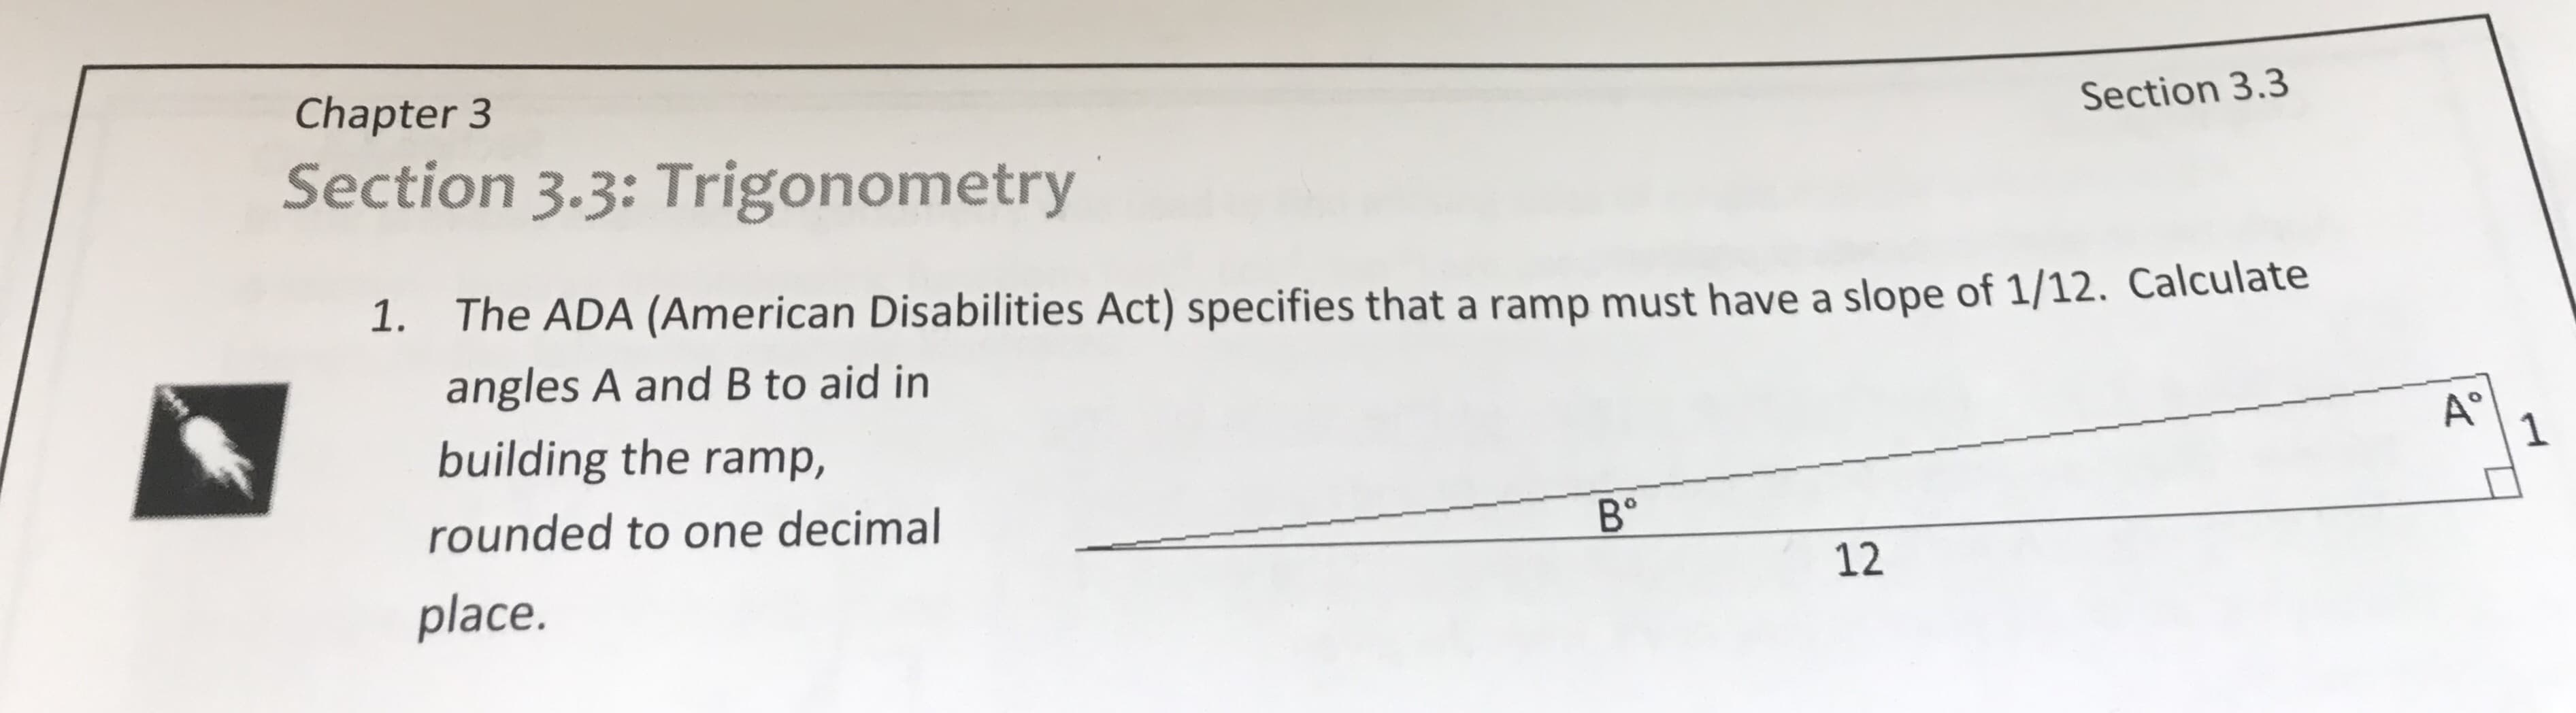 Section 3.3
Chapter 3
Section 3.3: Trigonometry
Calculate
The ADA (American Disabilities Act) specifies that a ramp must have a slope of 1/12
angles A and B to aid in
building the ramp,
rounded to one decimal
place.
1.
A°
В'
12
